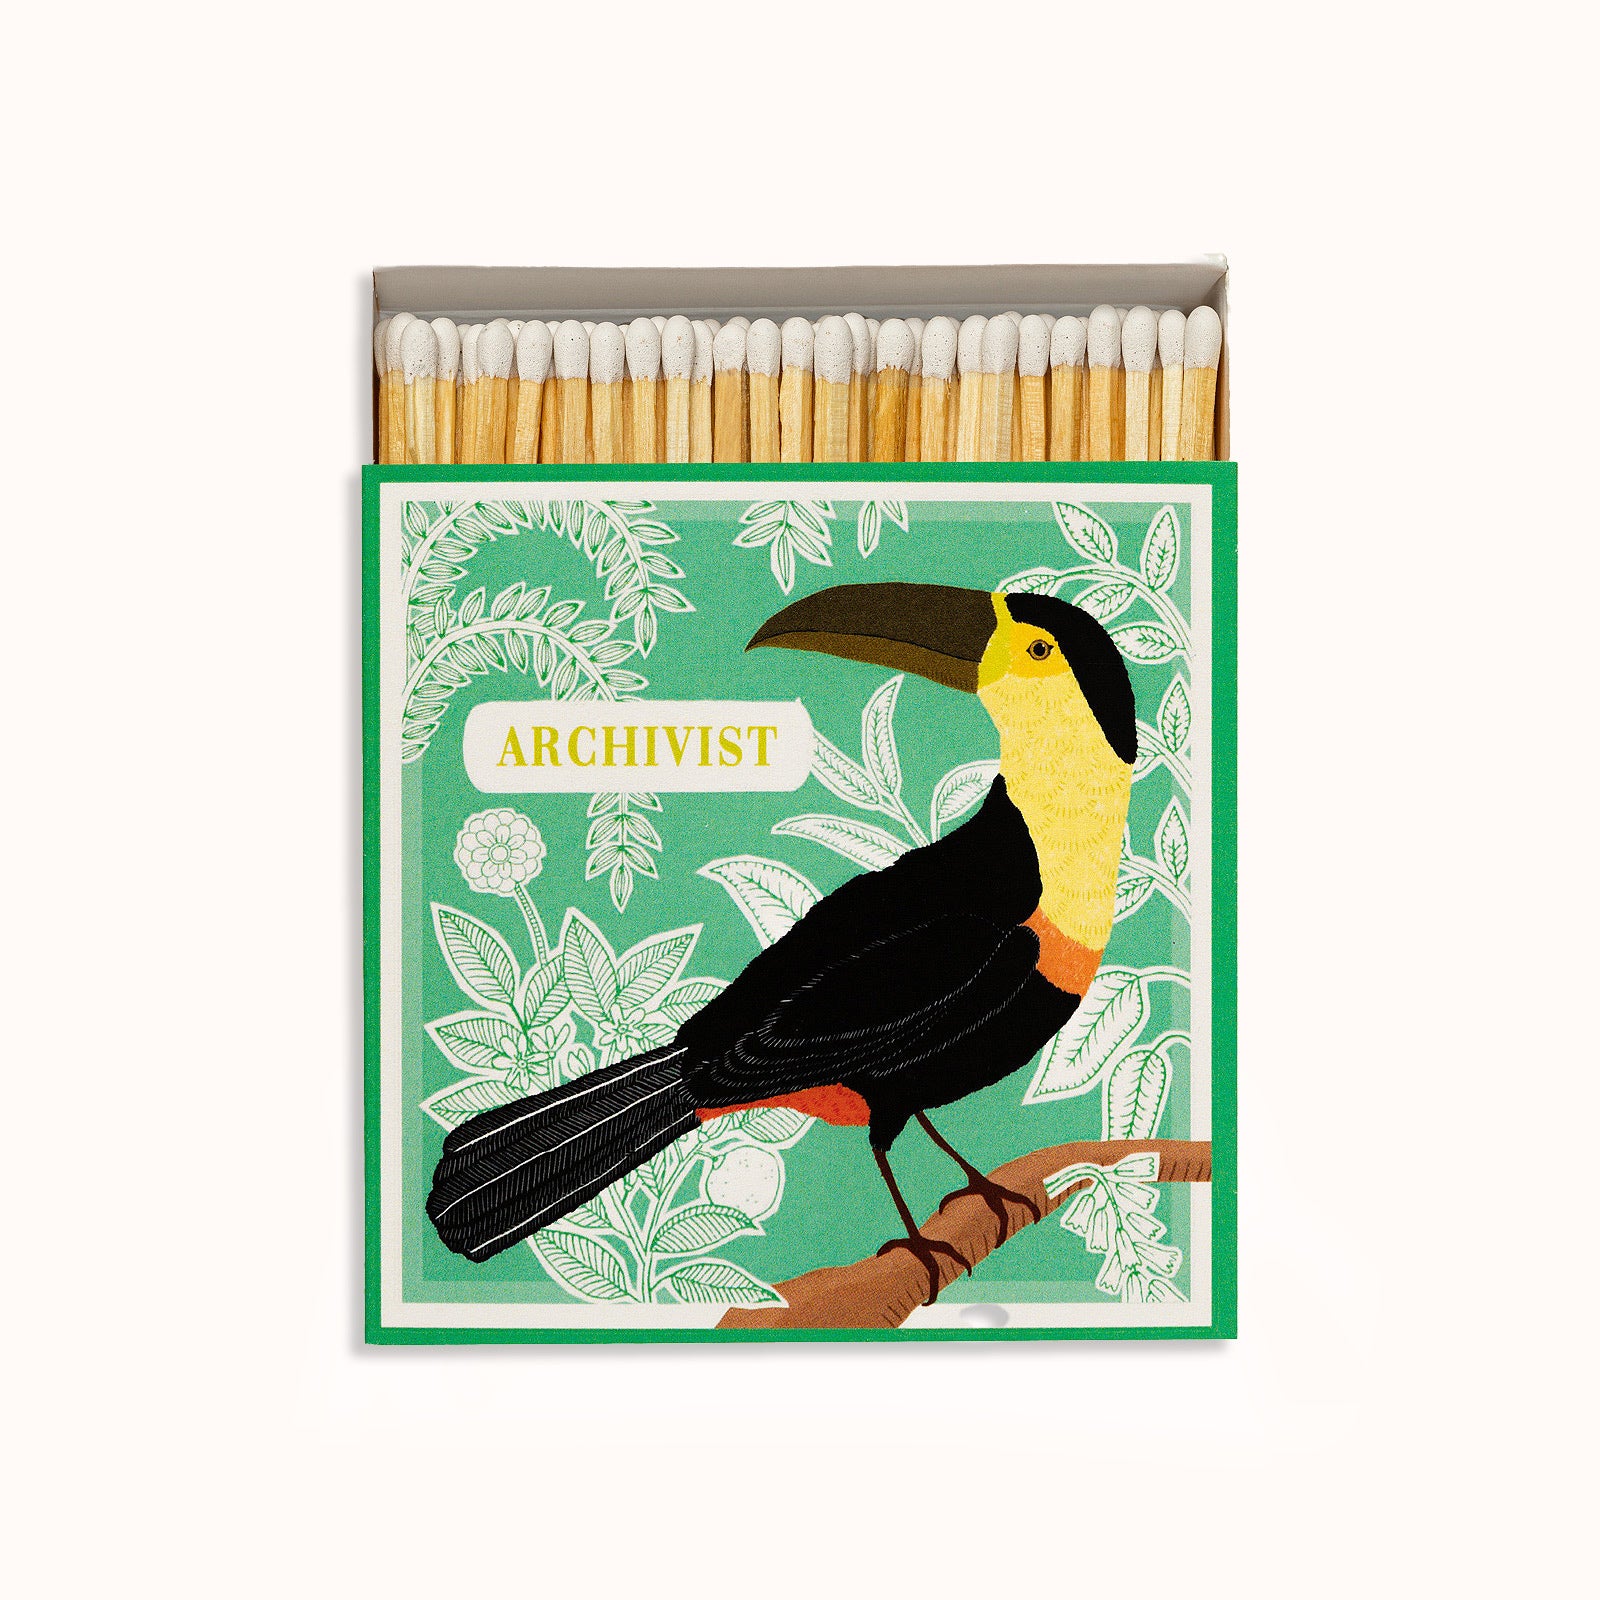 Archivist Gallery Matches Toucan